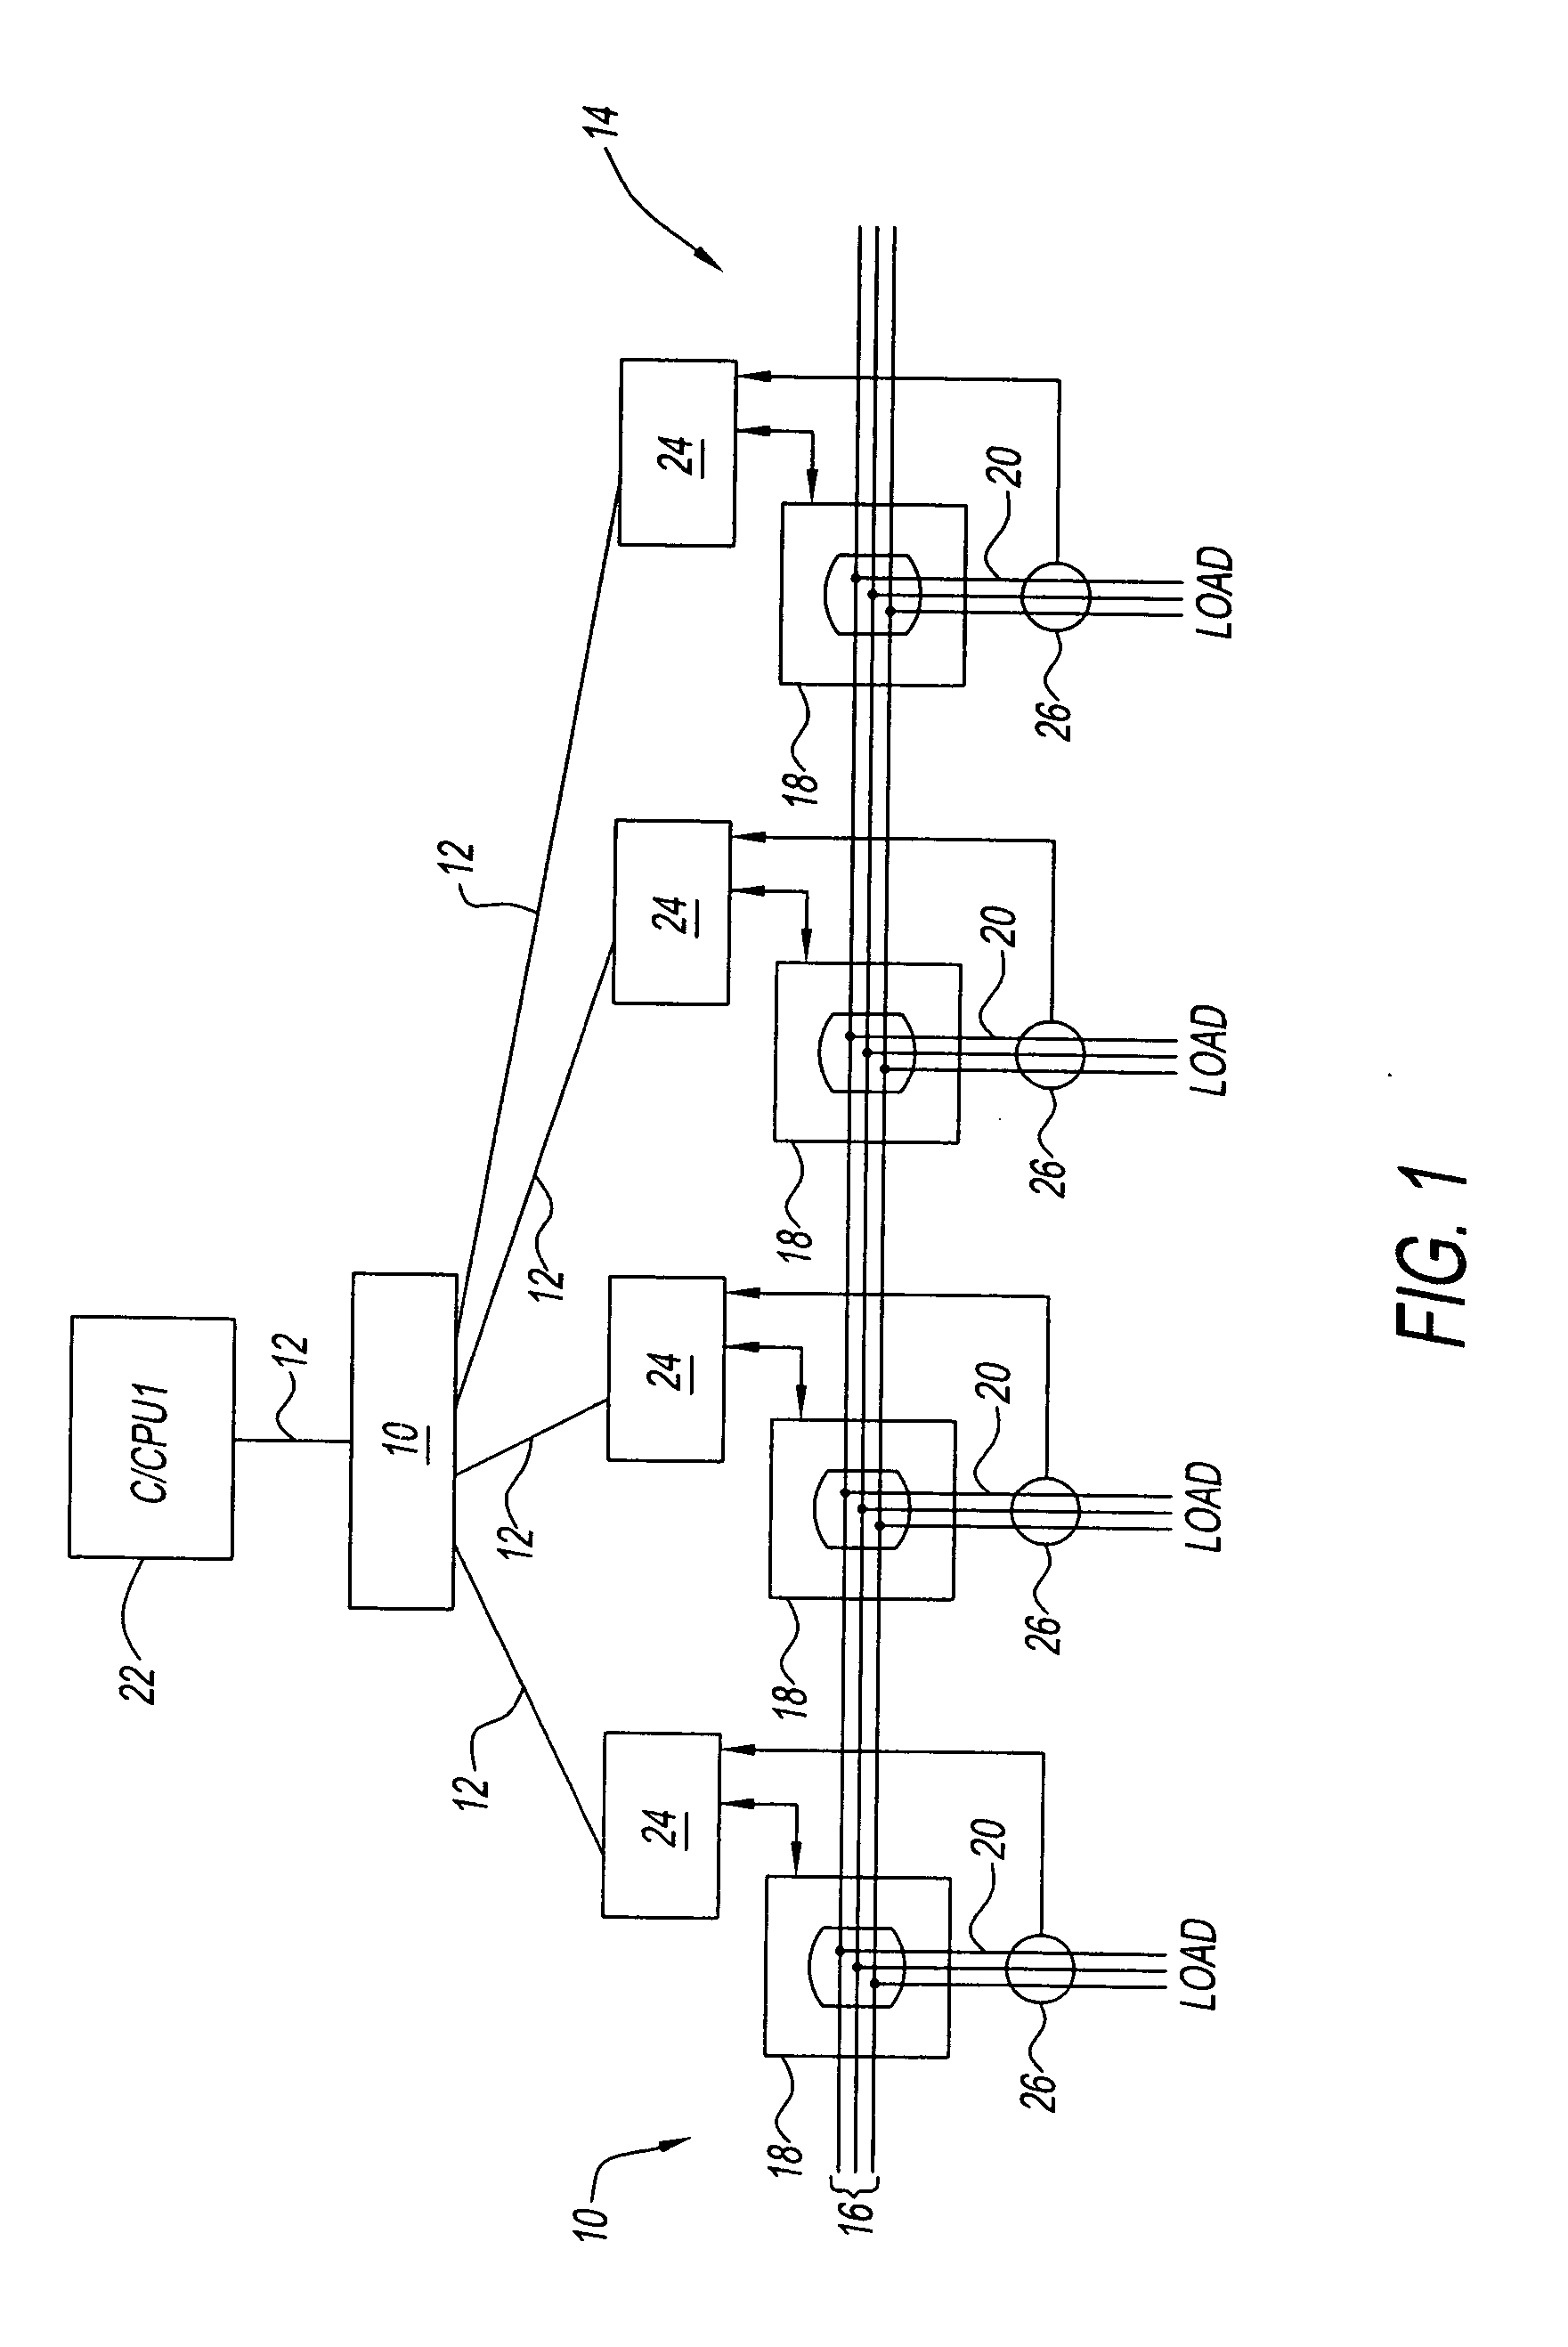 High performance network communication device and method